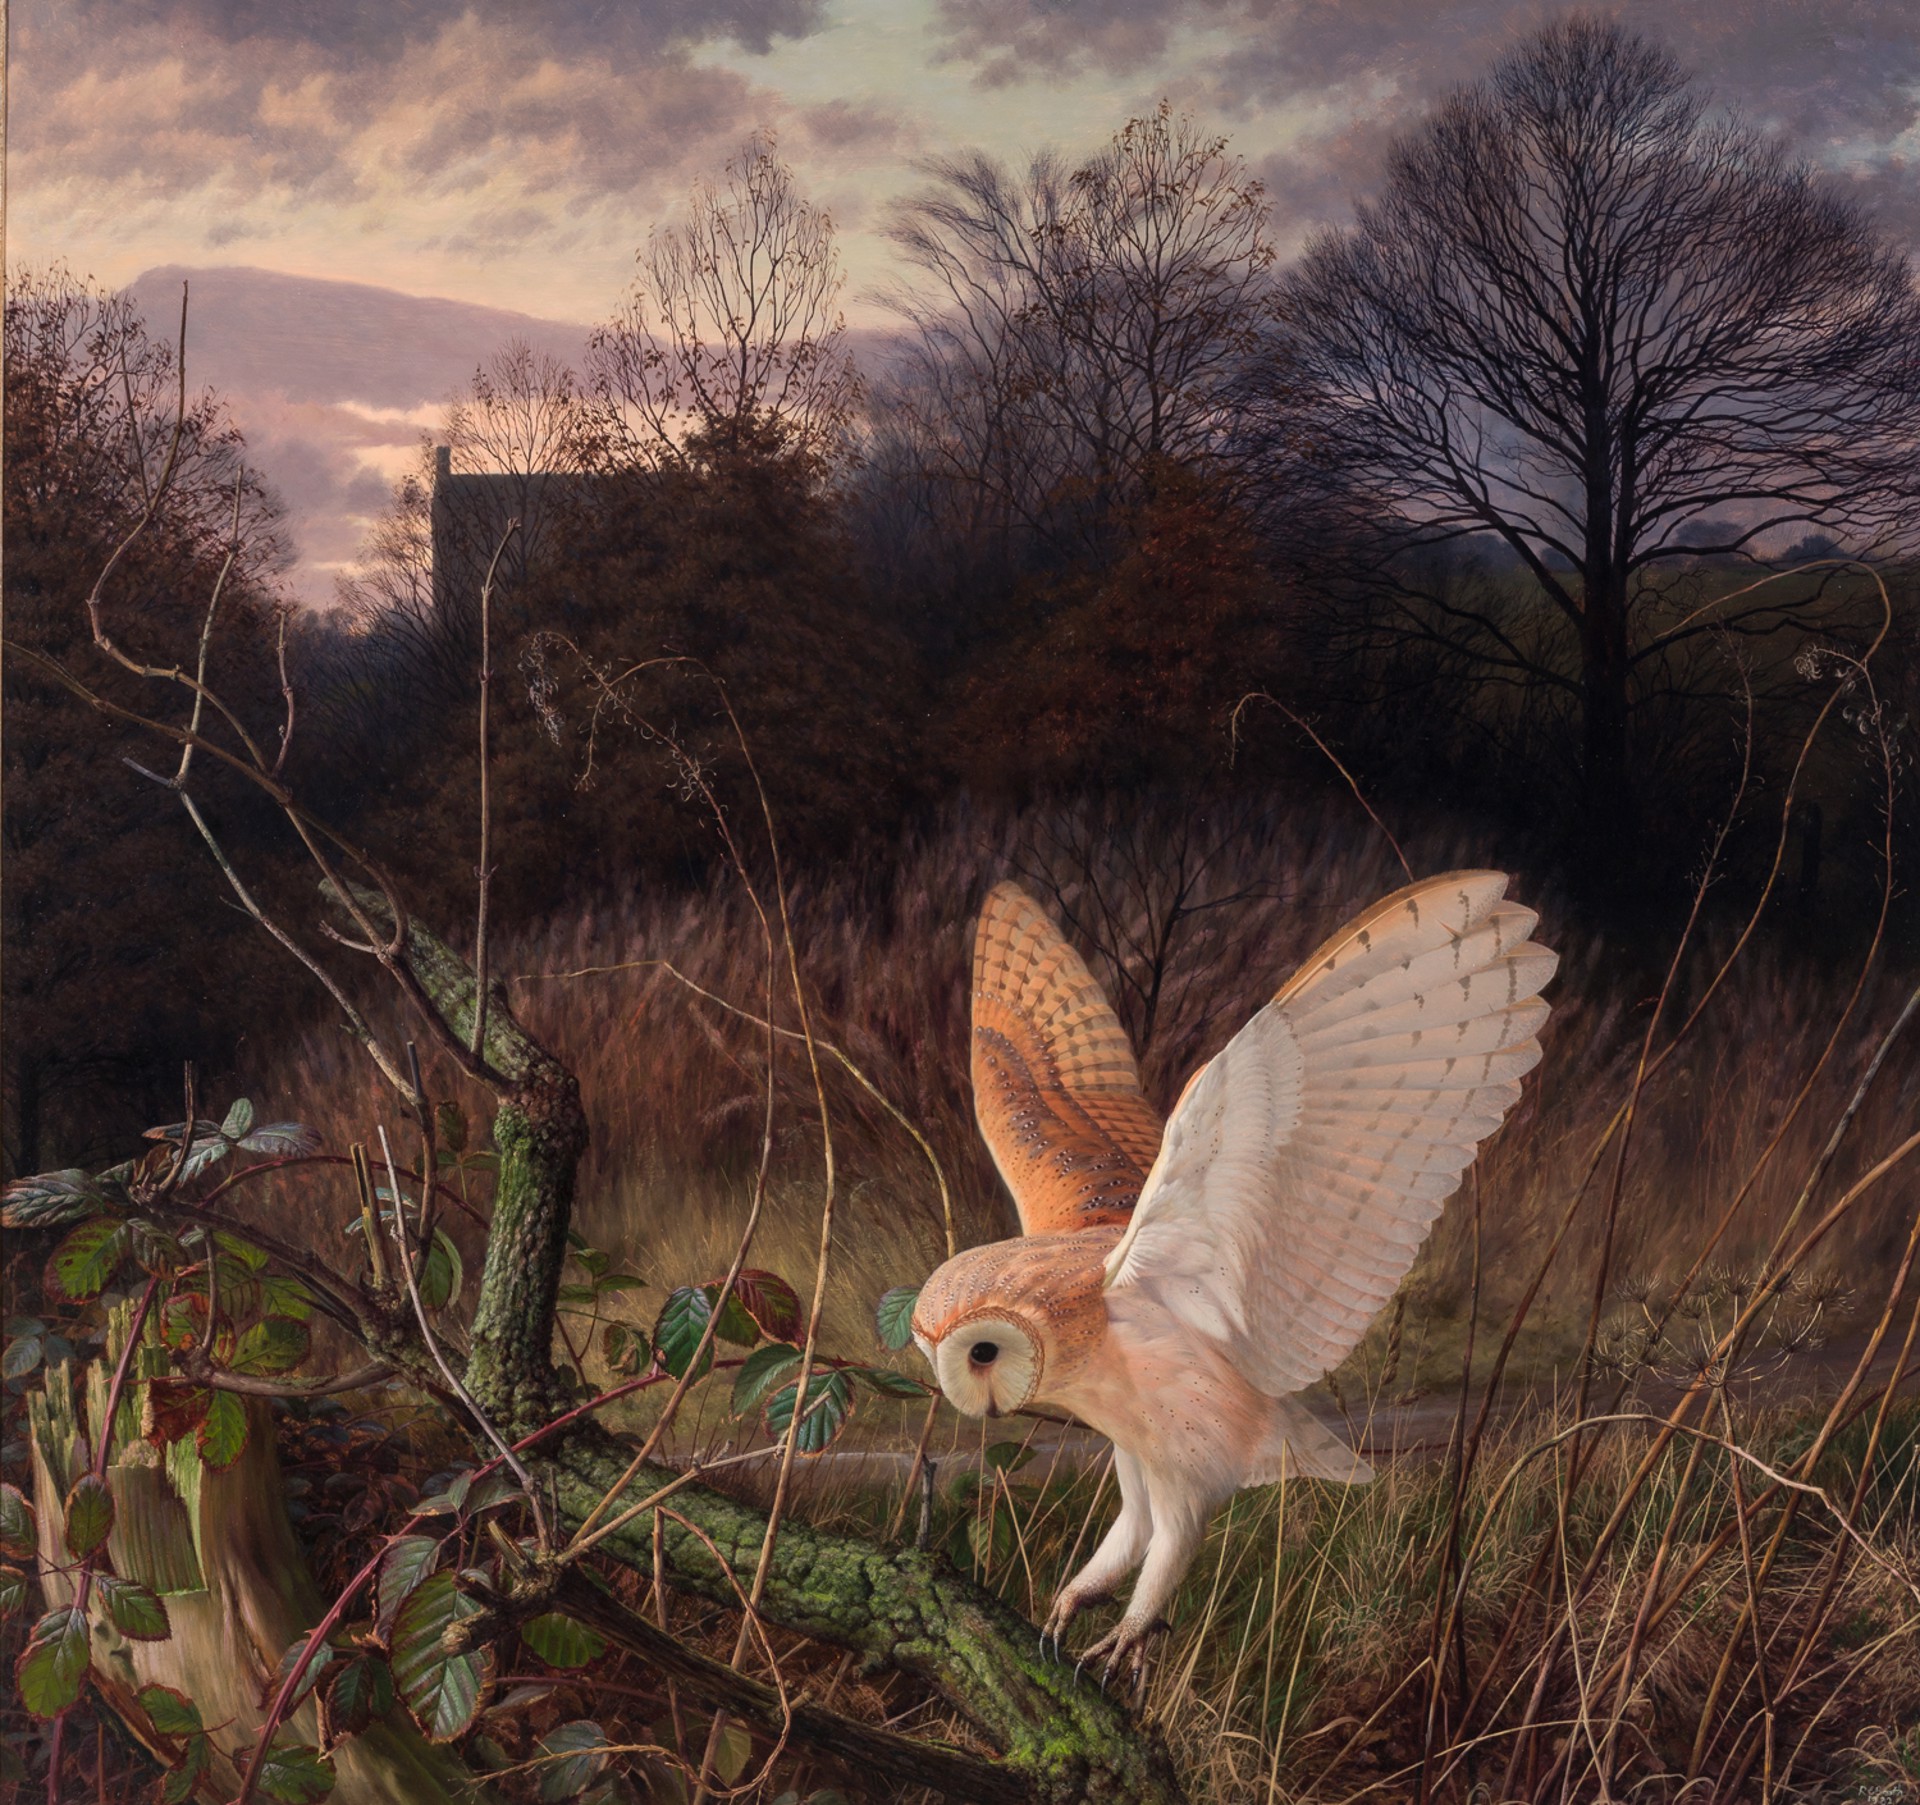 BARN OWL ON A WINTER EVENING by Raymond Booth